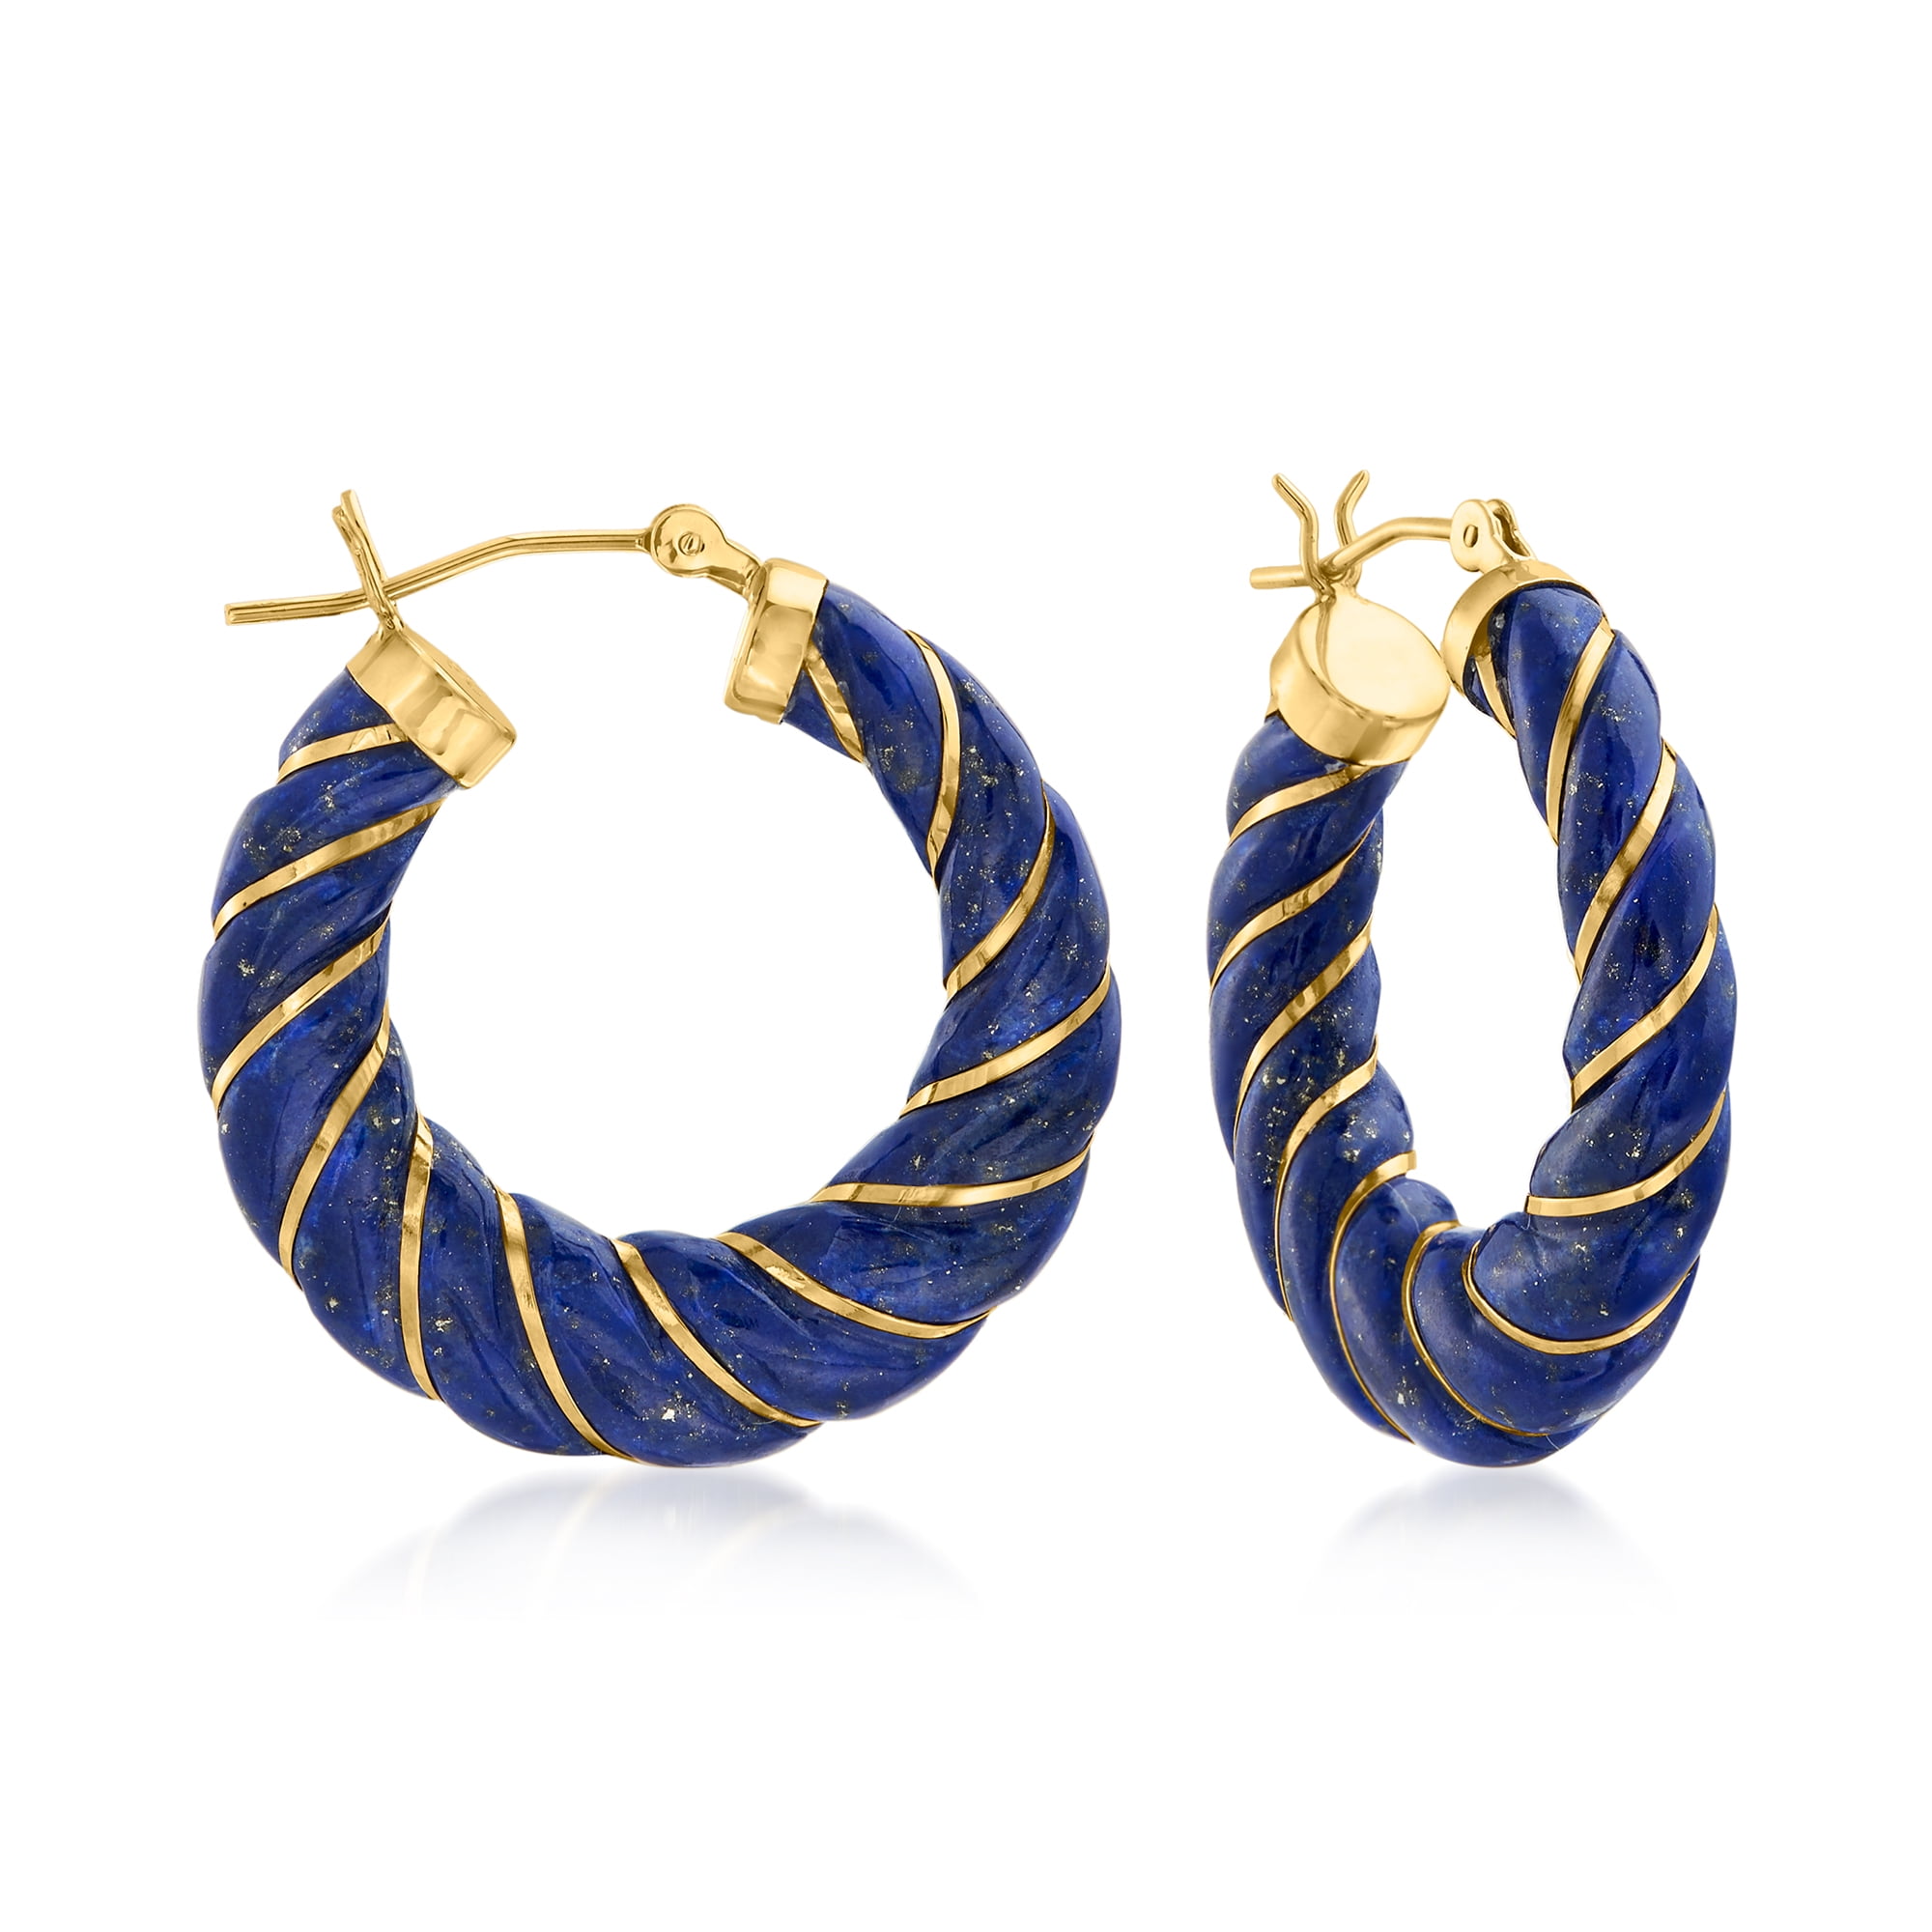 Ross-Simons Carved Lapis Hoop Earrings With 14kt Yellow Gold